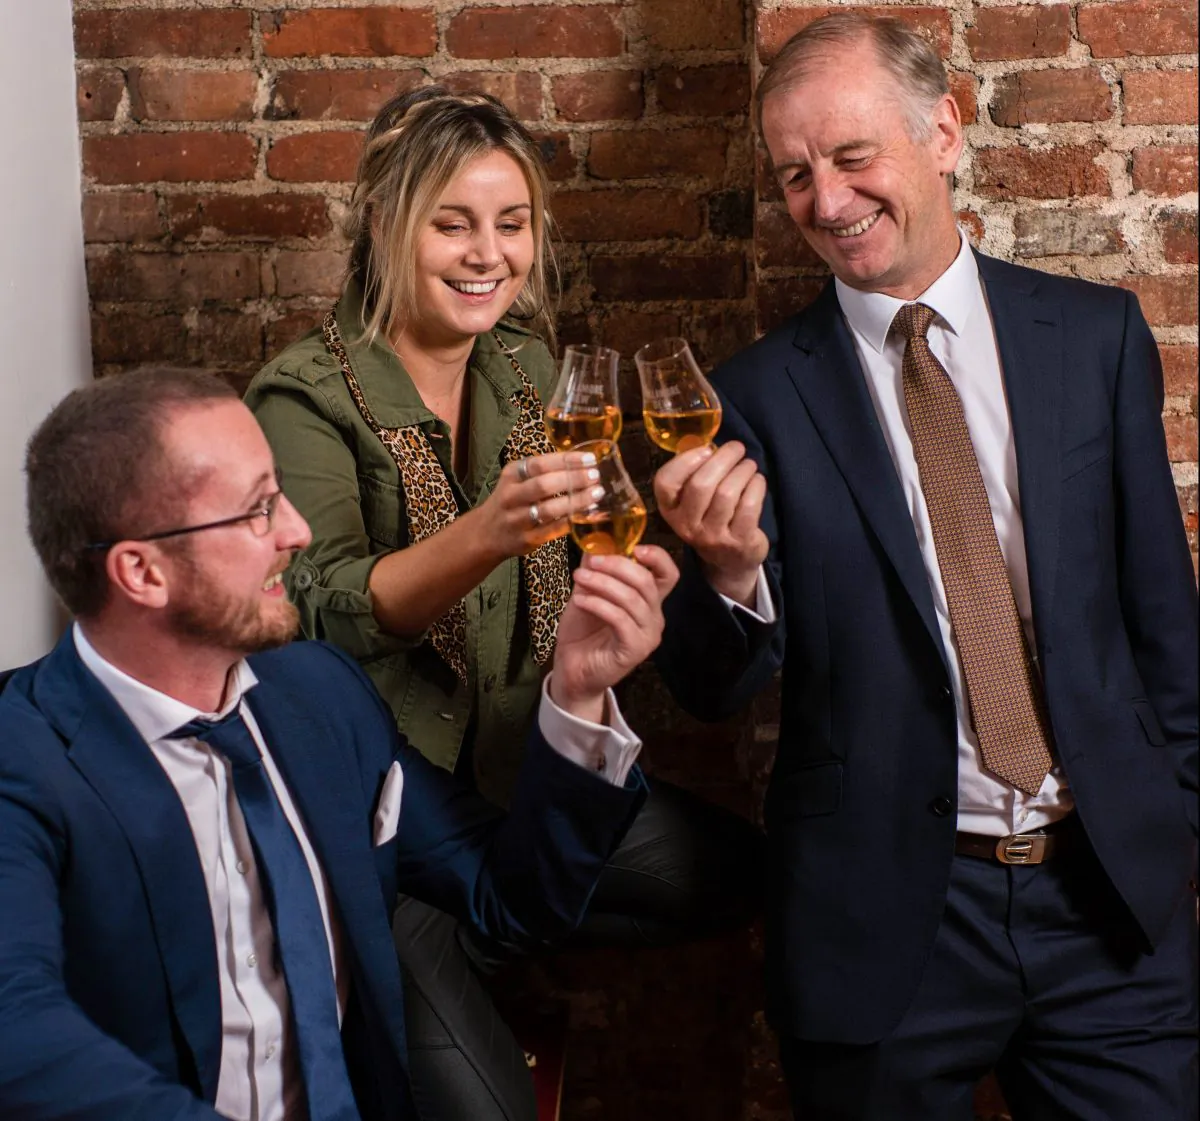 Giving a toast is a valuable social skill. Tim Herlihy (L), U.S. ambassador for Tullamore D.E.W. Irish whiskey, is no stranger to the art. (Courtesy of Tullamore D.E.W.) 